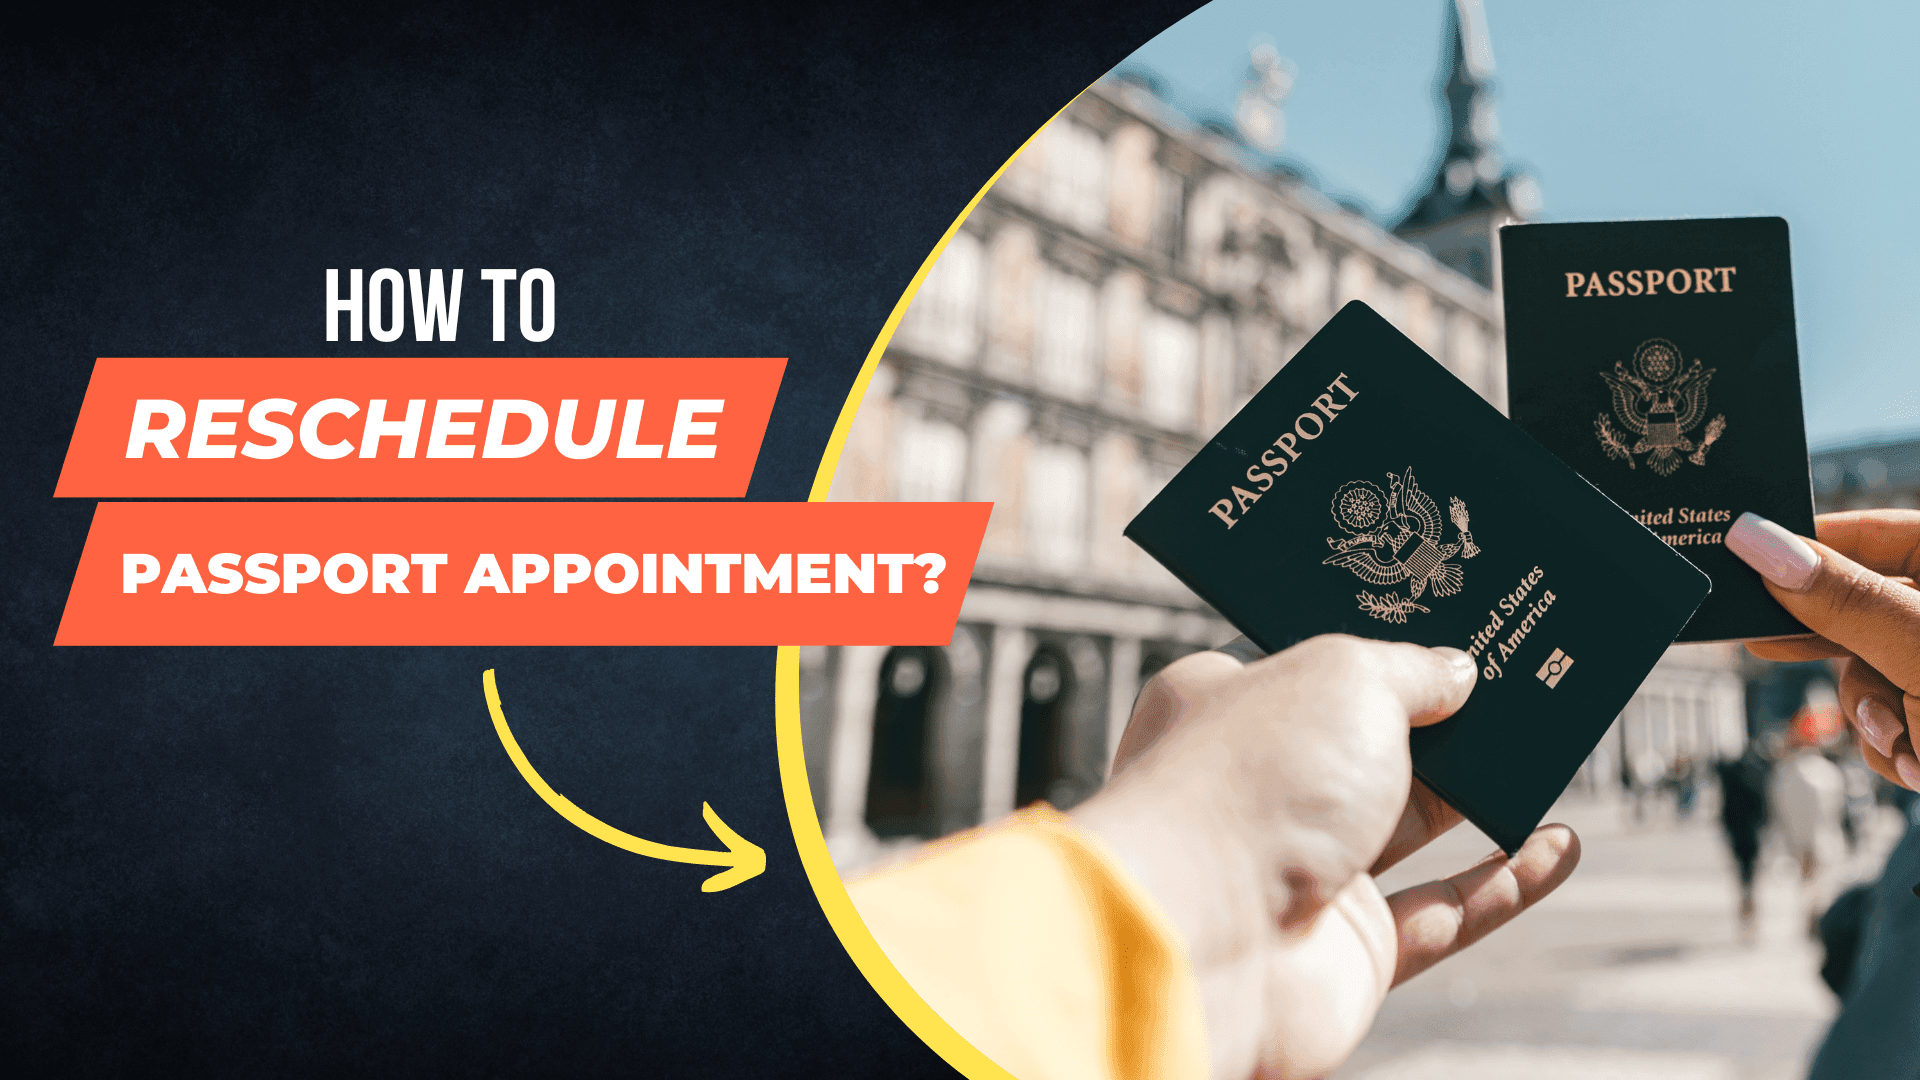 How to reschedule passport appointments